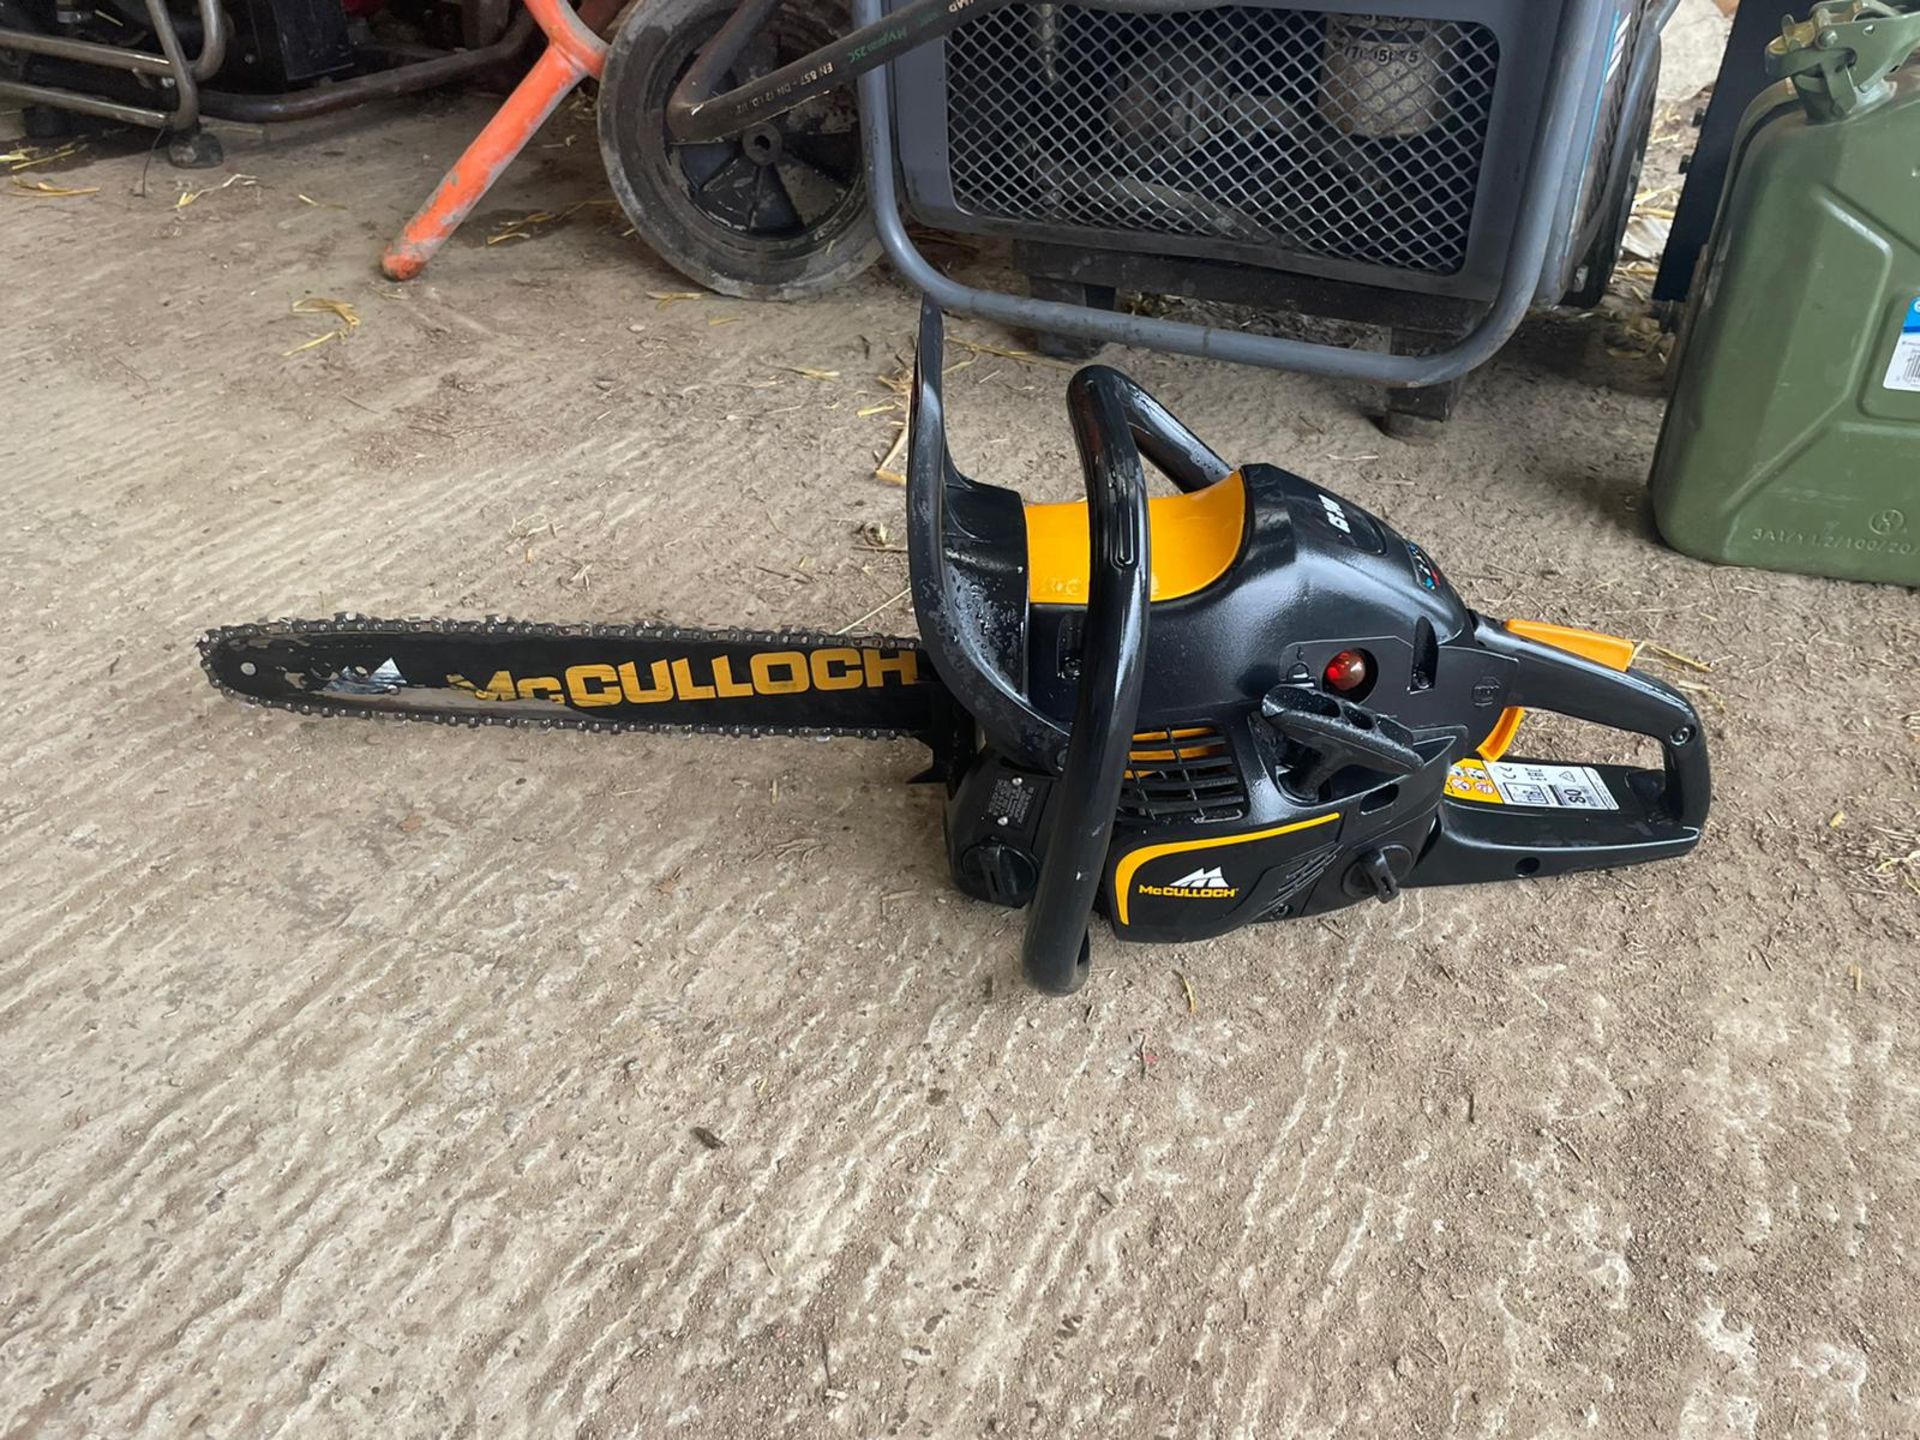 2018 McCULLOCH CS340 CHAINSAW, MADE BY HUSQVARNA, RUNS AND WORKS, 16" BAR AND CHAIN *NO VAT* - Image 5 of 5